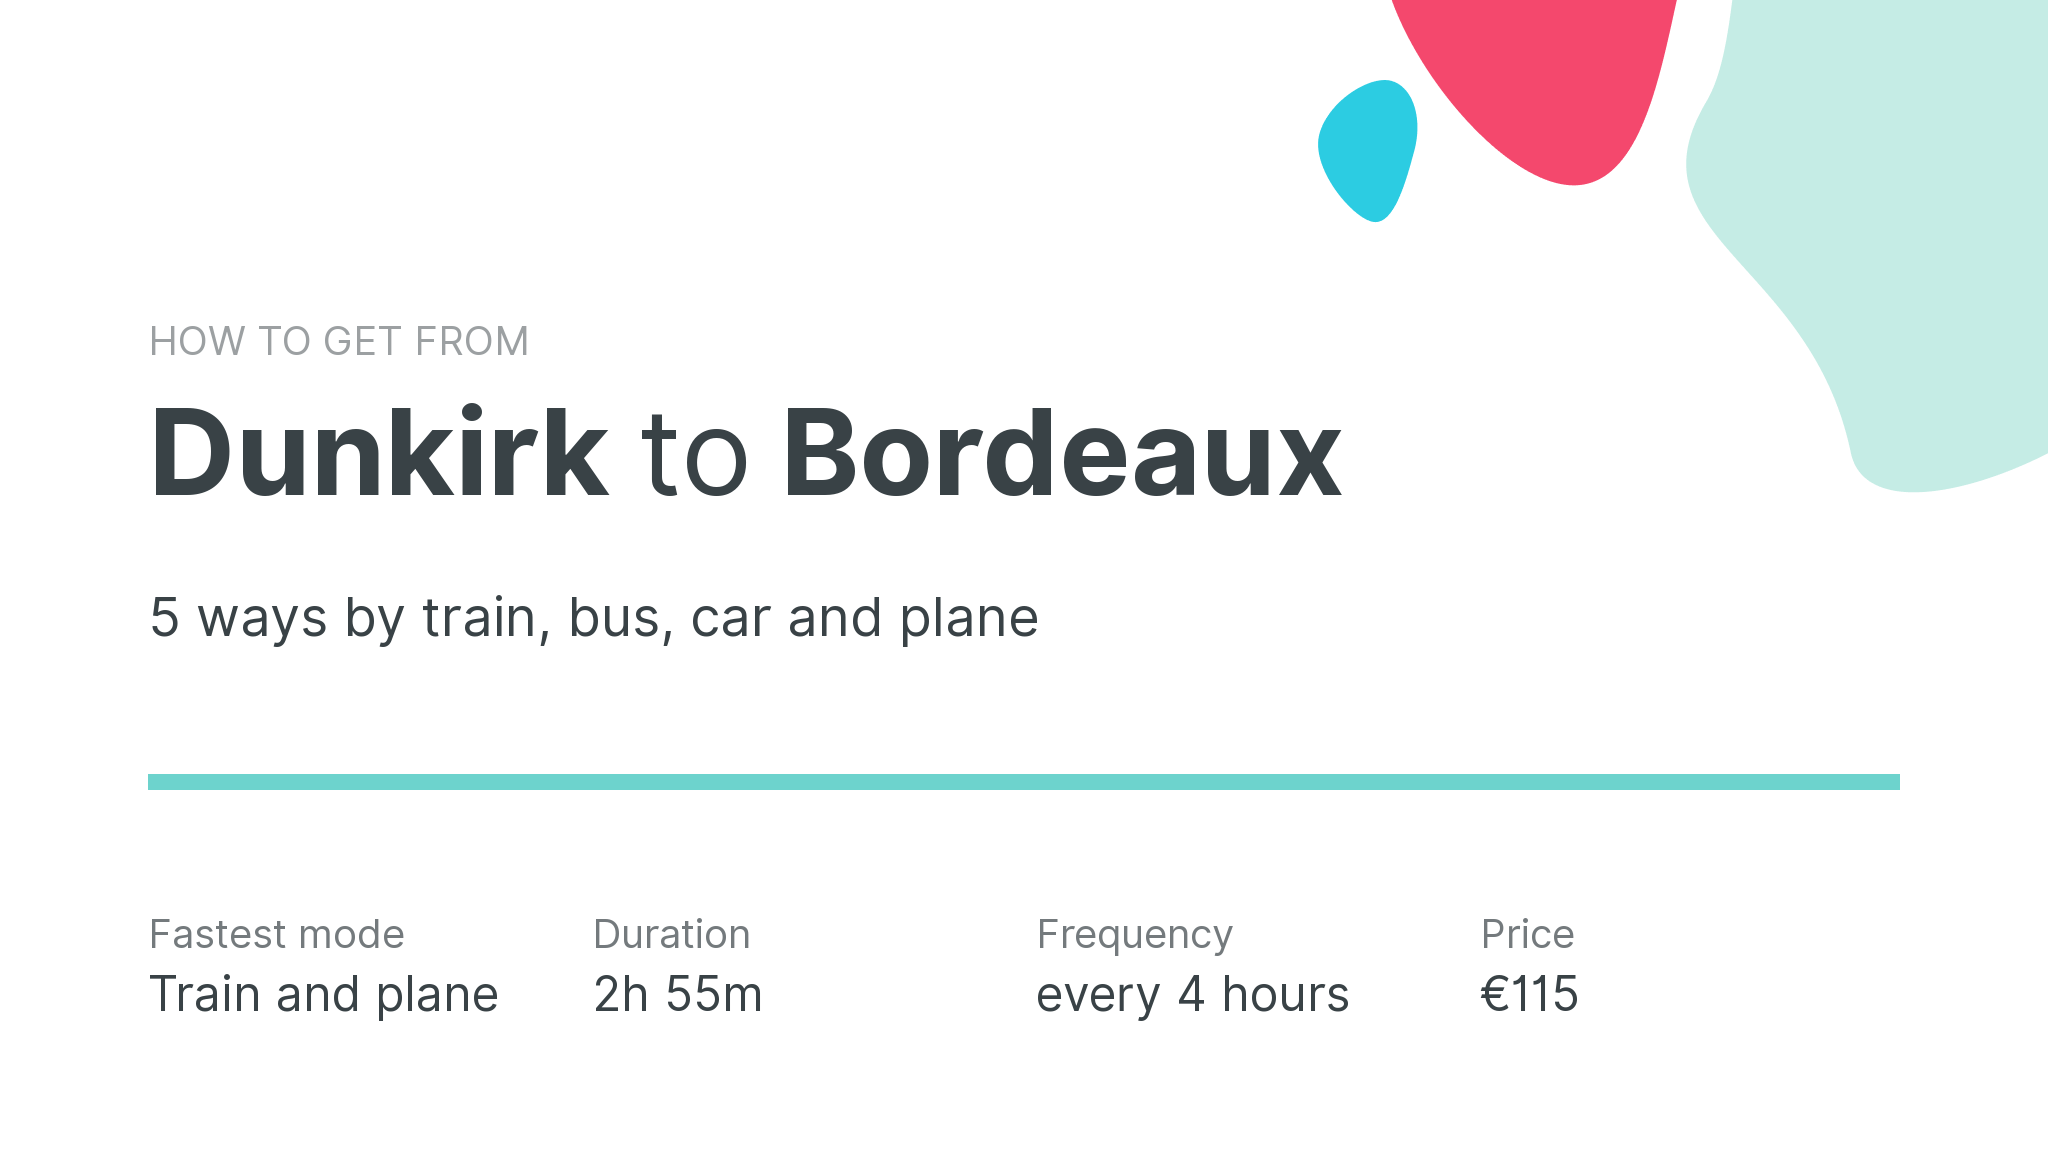 How do I get from Dunkirk to Bordeaux